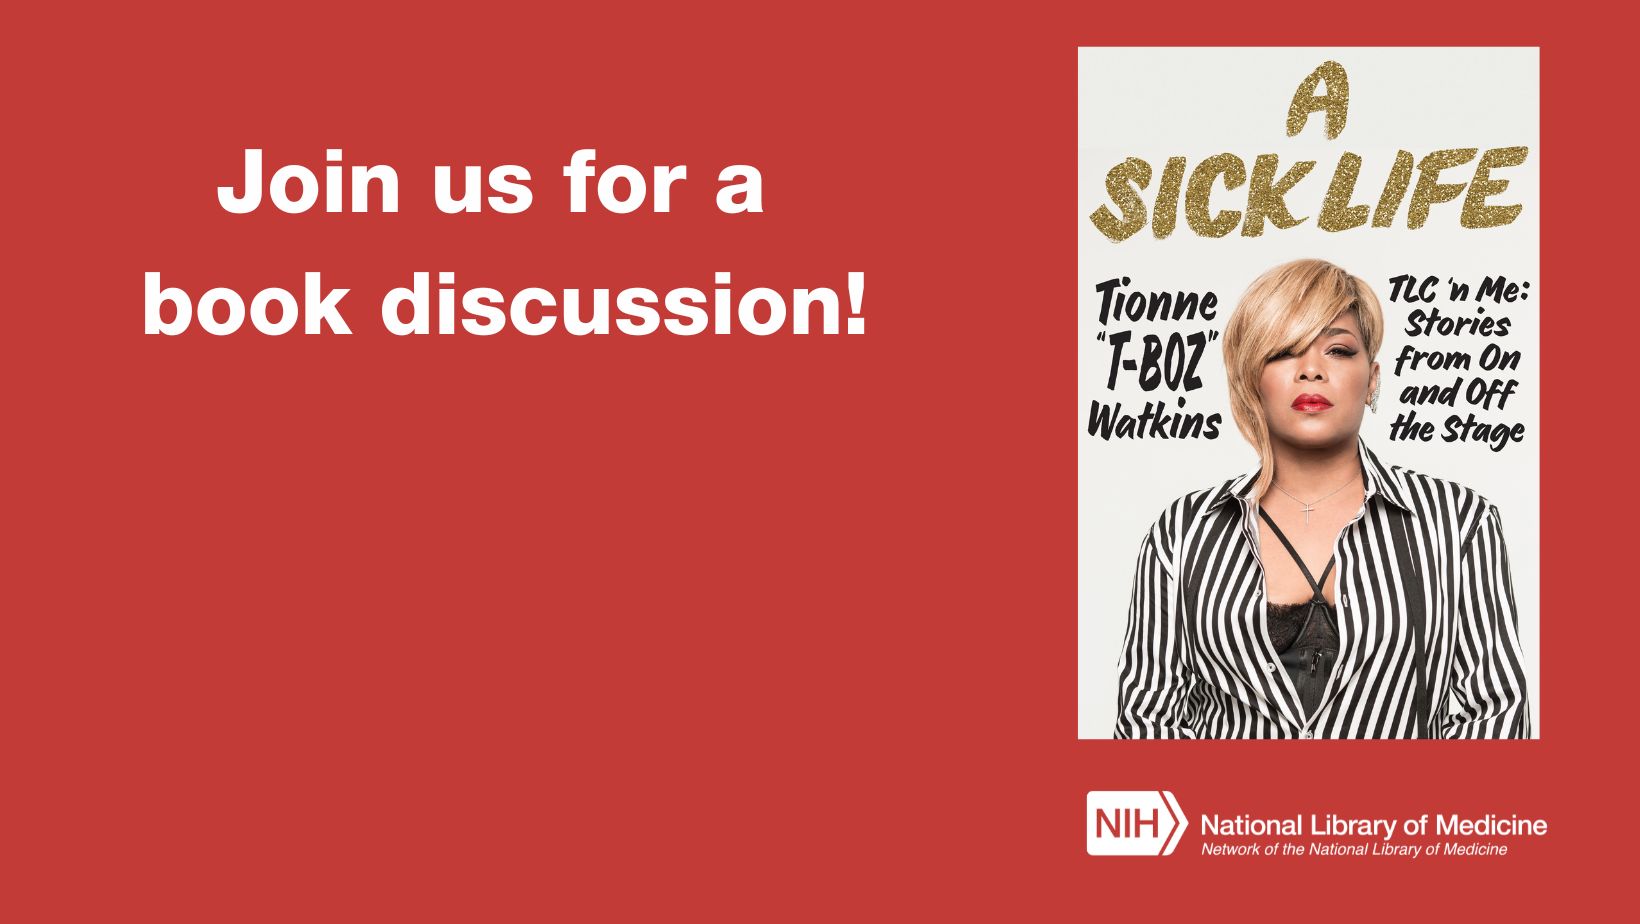 Join us for a discussion of A Sick Life